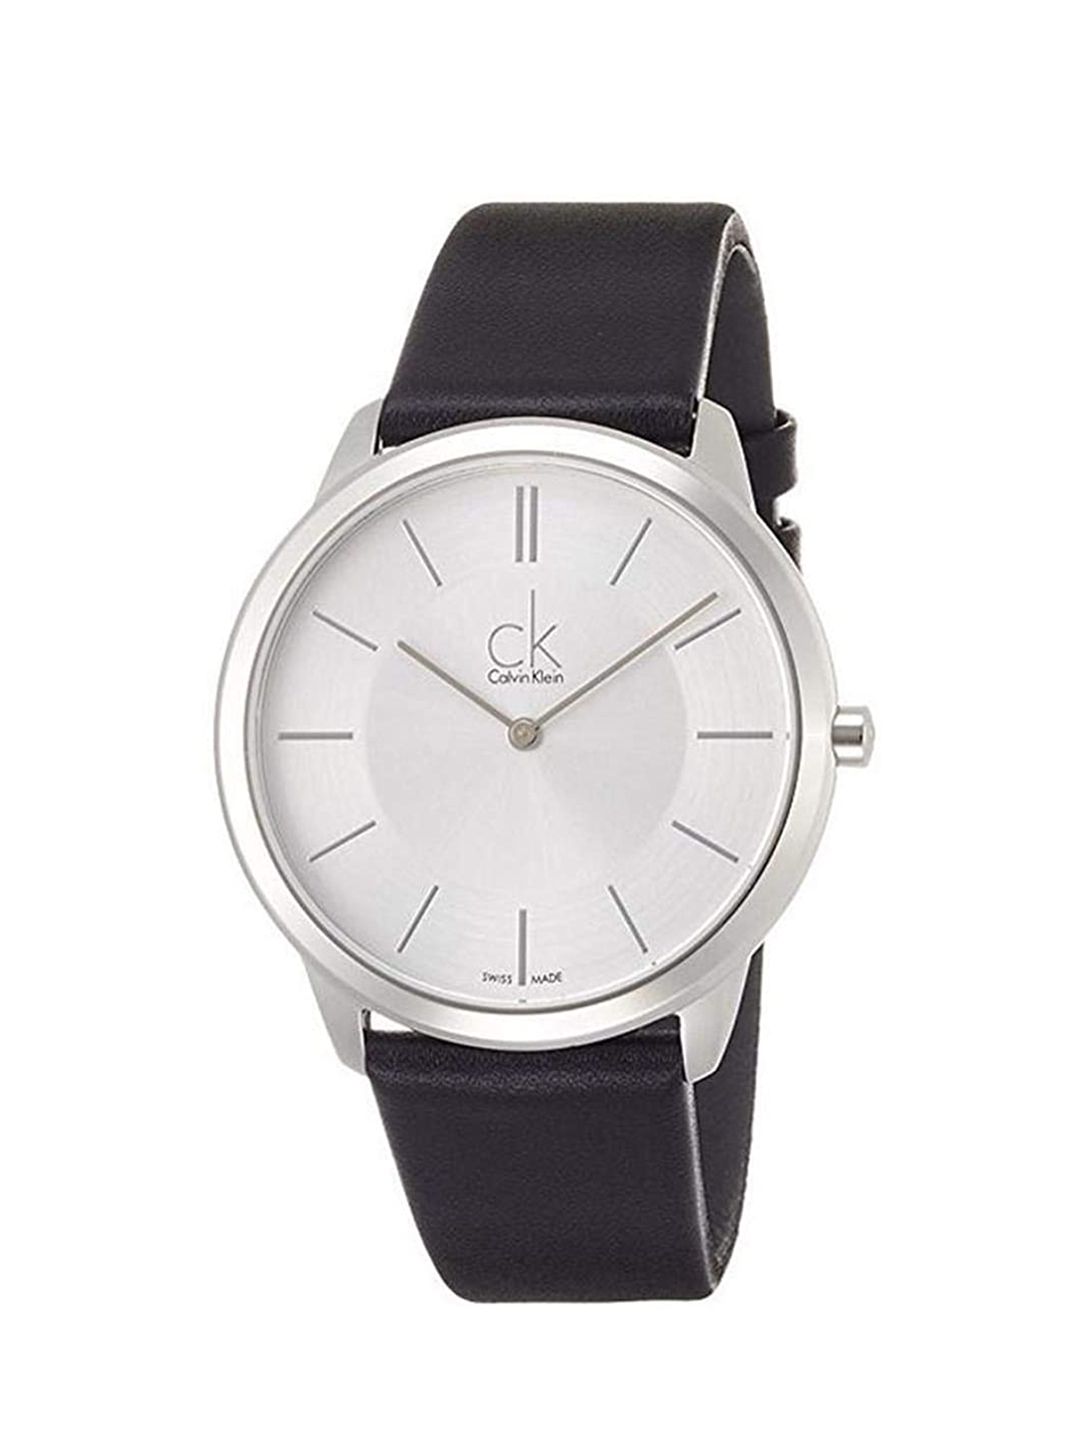 Calvin Klein Women Silver-Toned Dial & Black Leather Straps Analogue Watch K3M211C6 Price in India